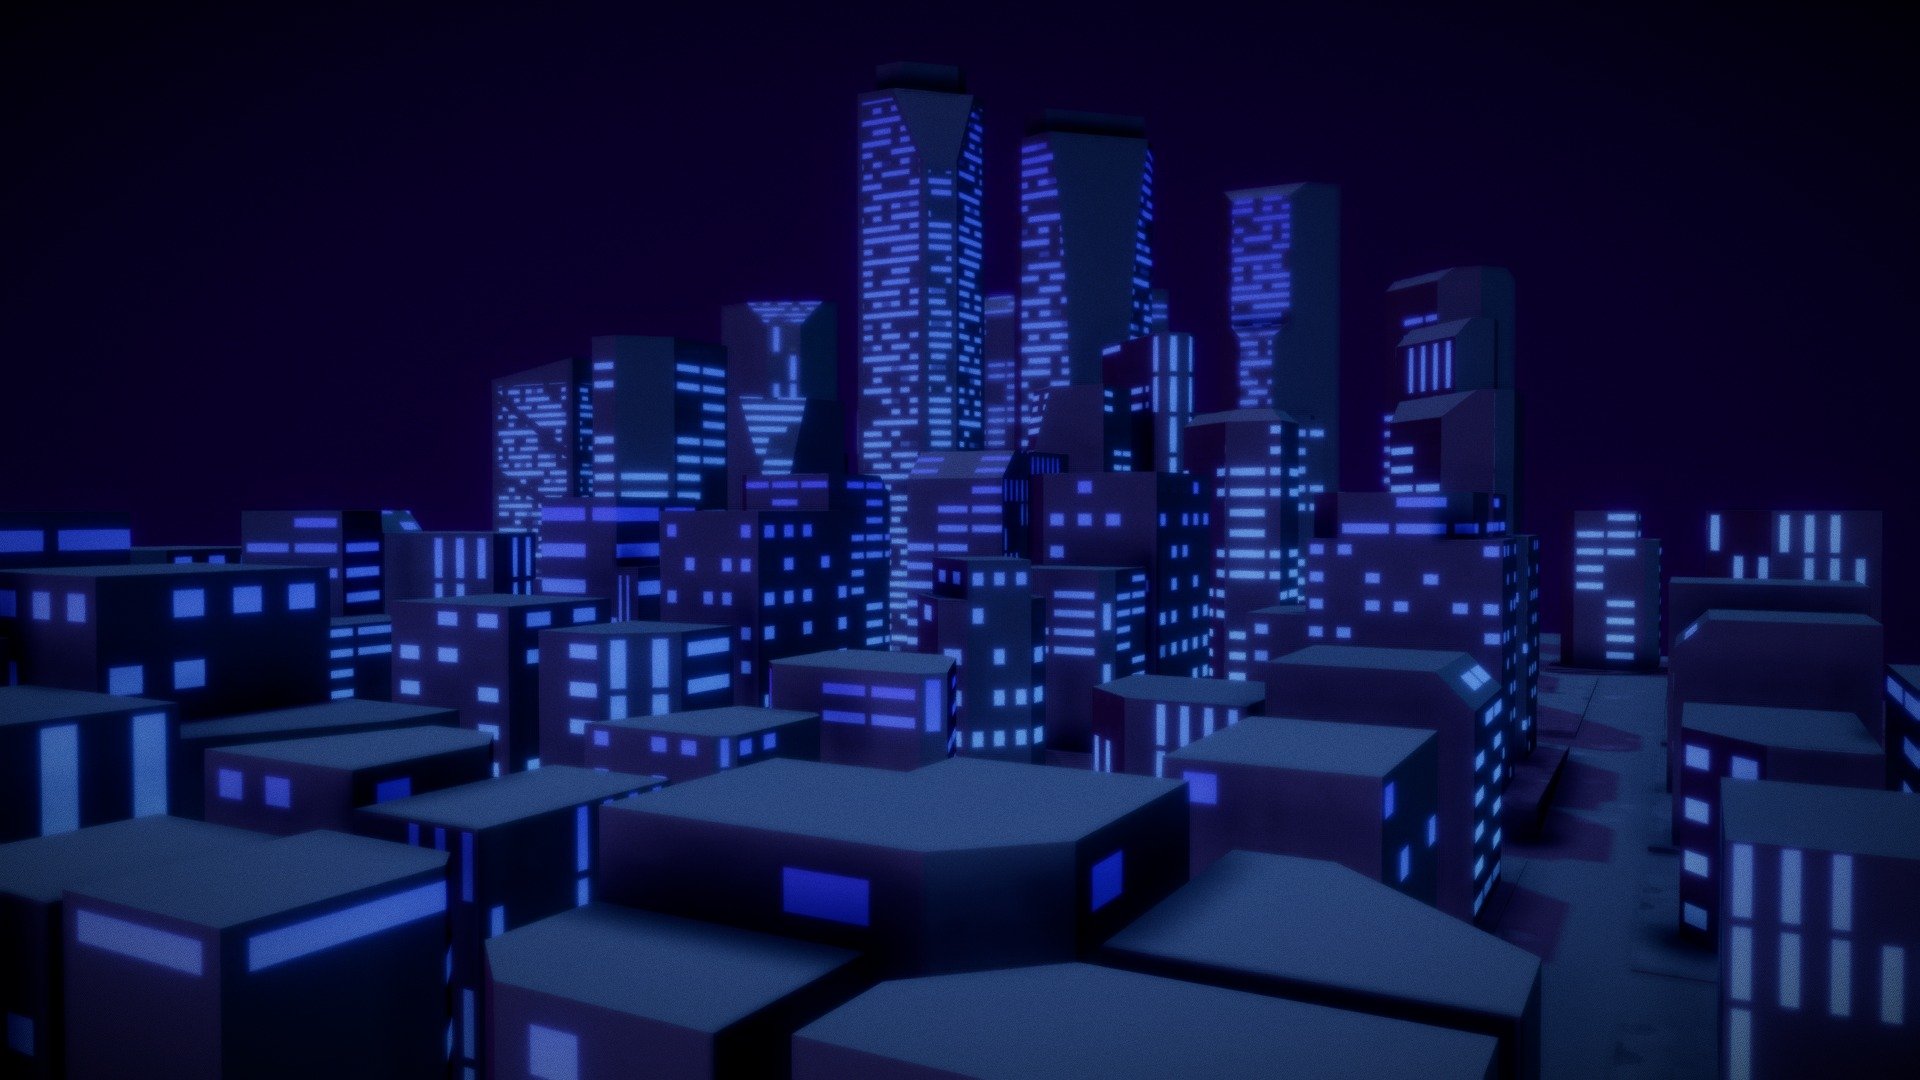 This is a simplistic low-poly city model, with most building details being contained in emissive/specular maps.  Ideal use cases include background scenery, as well as furnishing with more detailed street-level models.  The latter of the two I've also created, though it was not a good candidate for uploading to Sketchfab 3d model